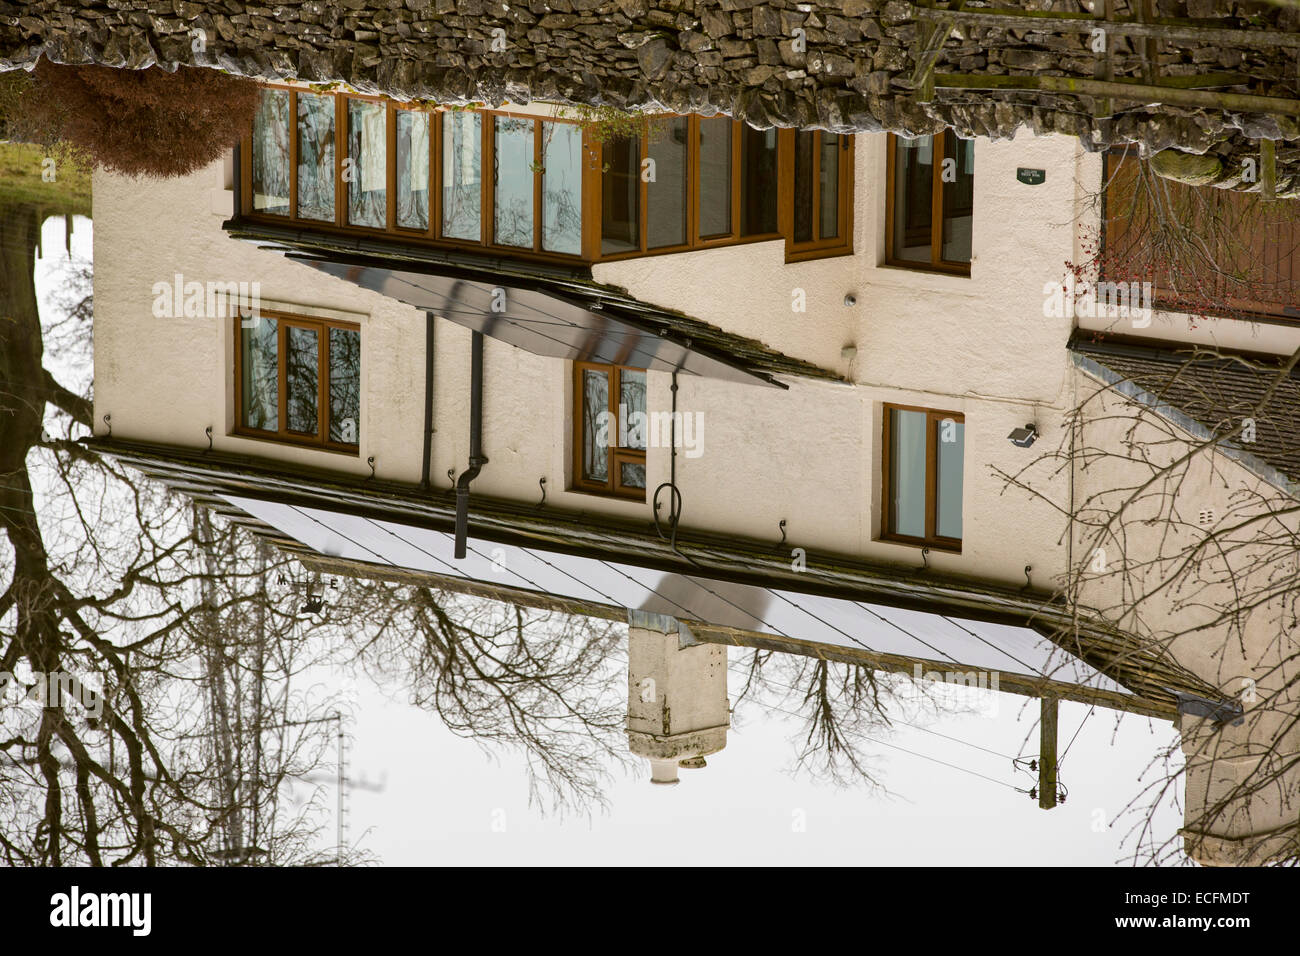 Solar panels on a house roof reflected in the Leeds Liverpool canal near Skipton, UK. Stock Photo